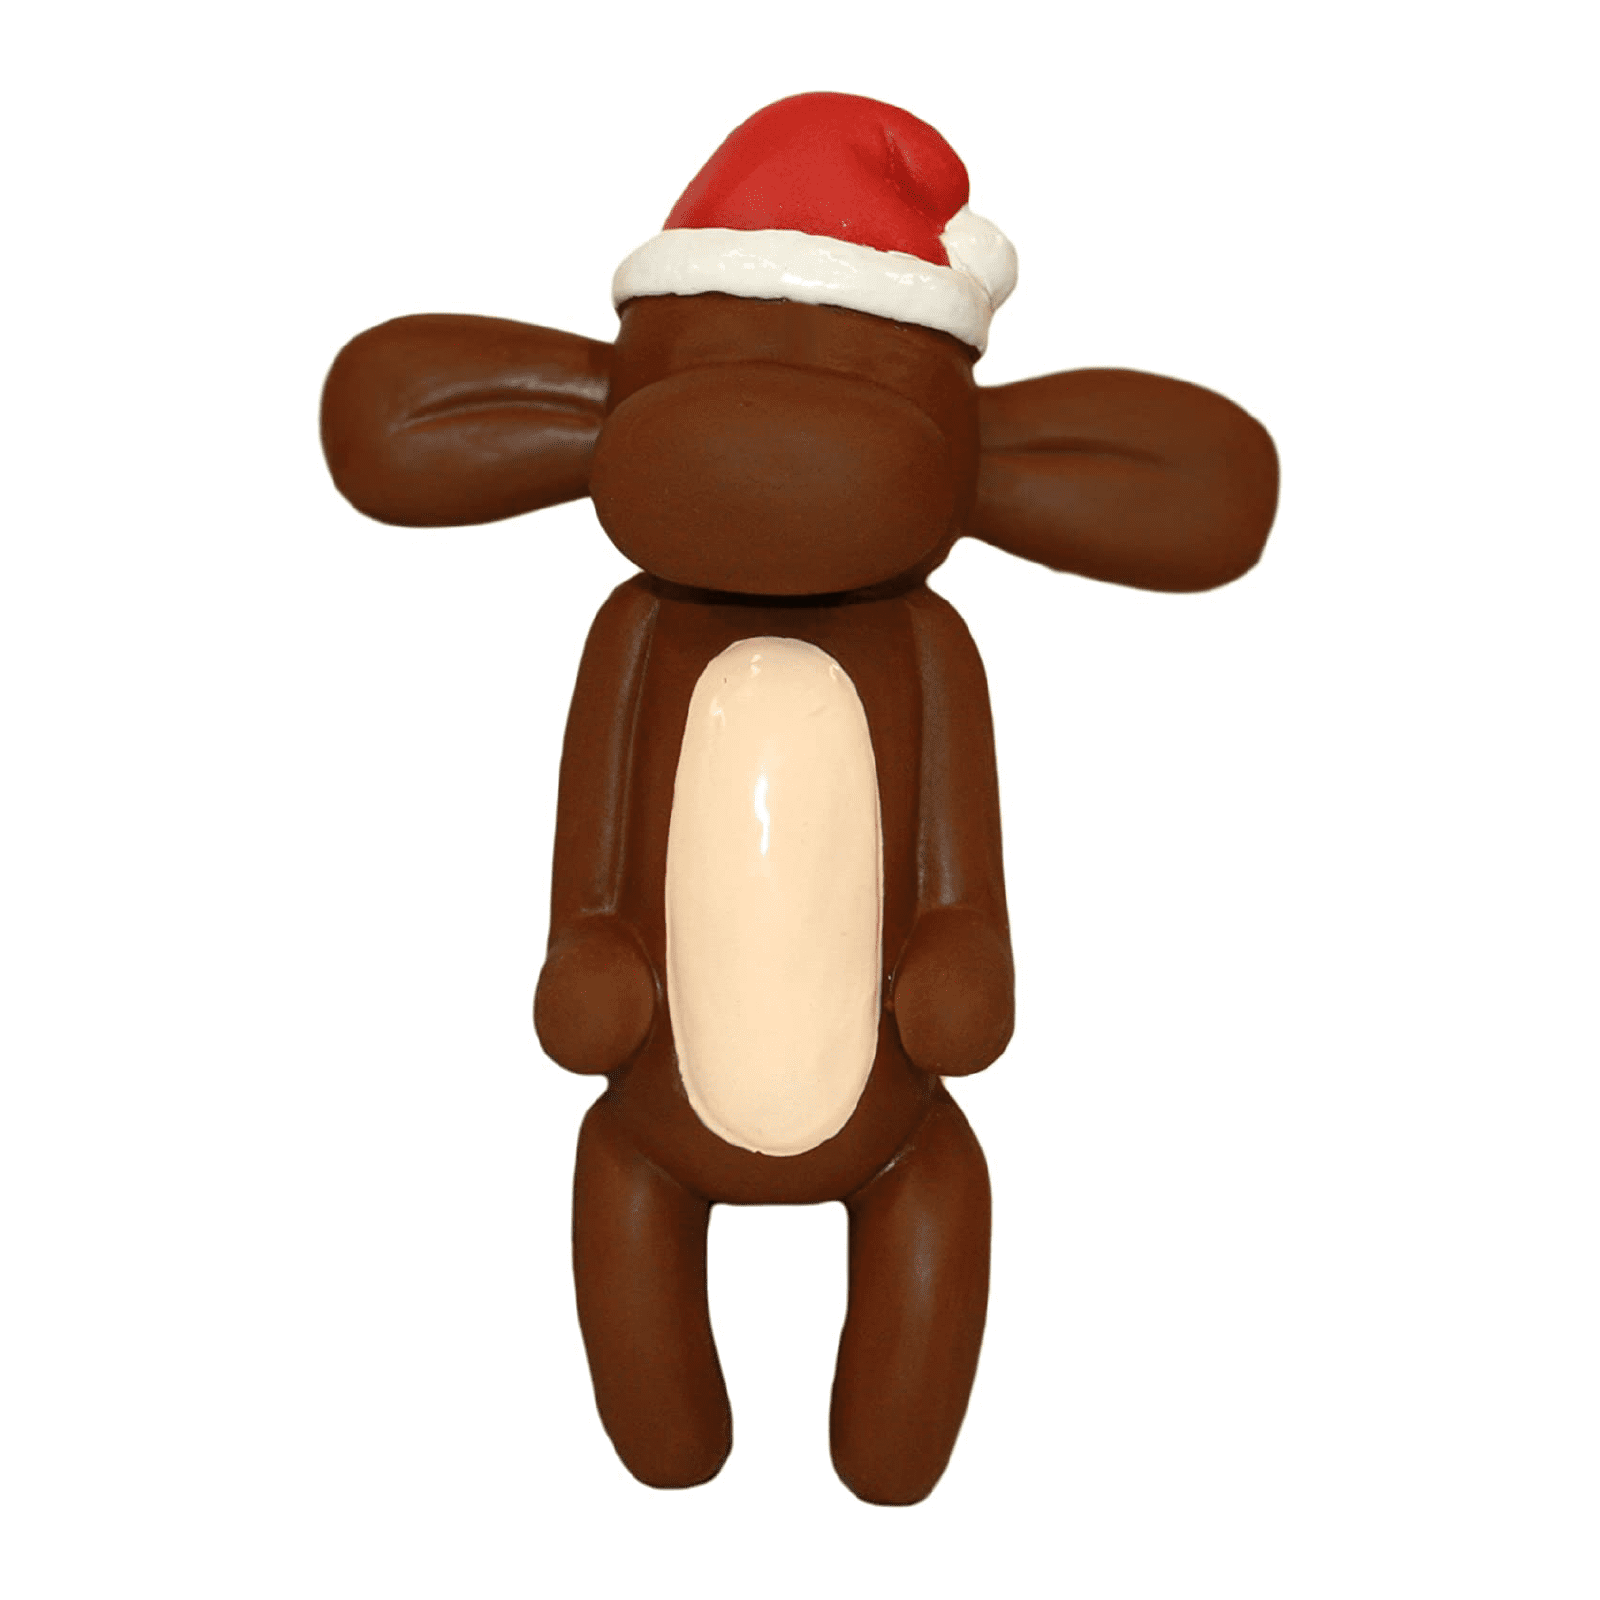 Charming Pet Latex Rubber Balloon Animal Monkey Squeaky Dog Toy